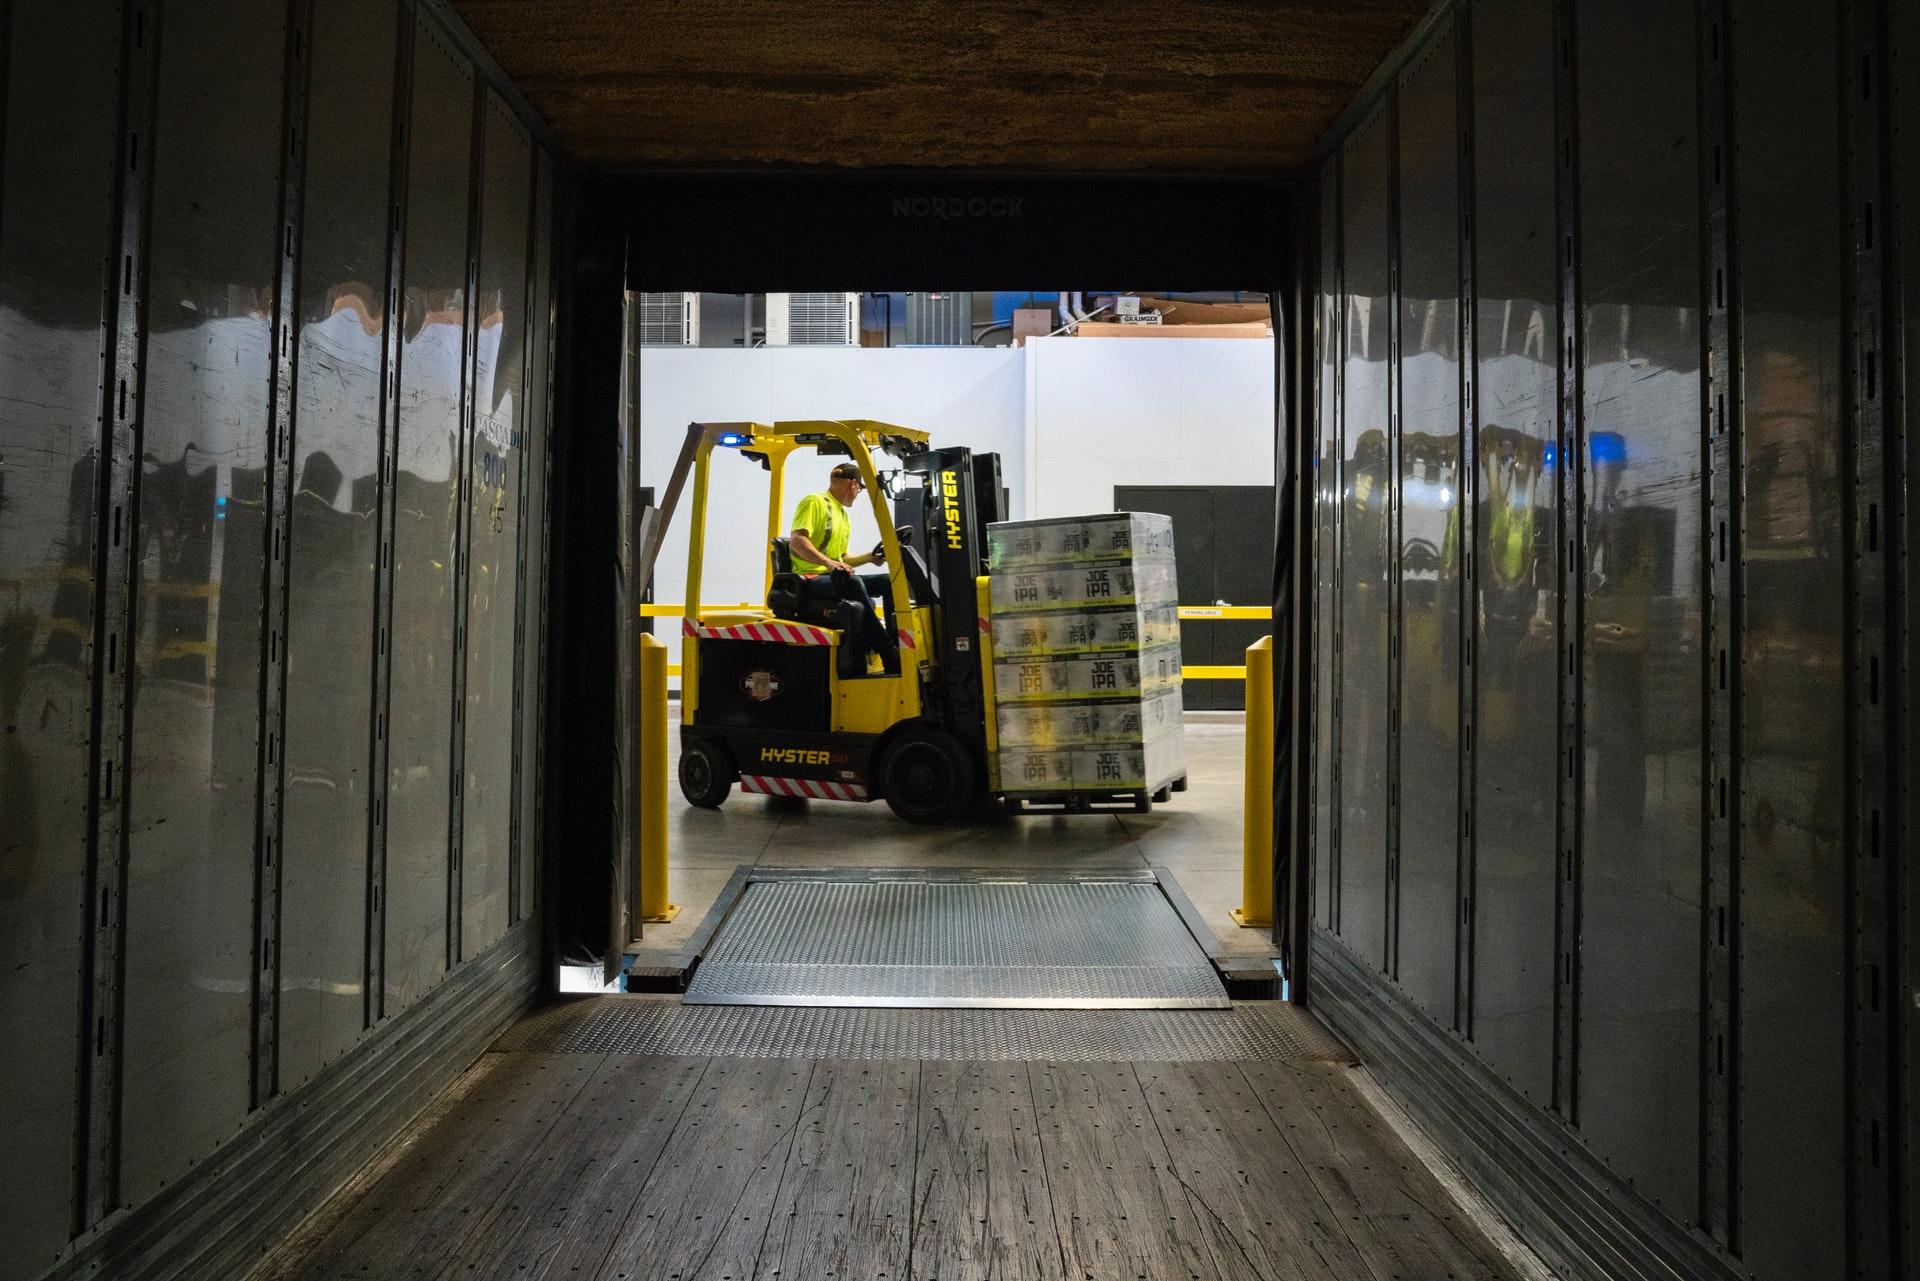 5 Best Safety Practices In Operating Forklift Trucks